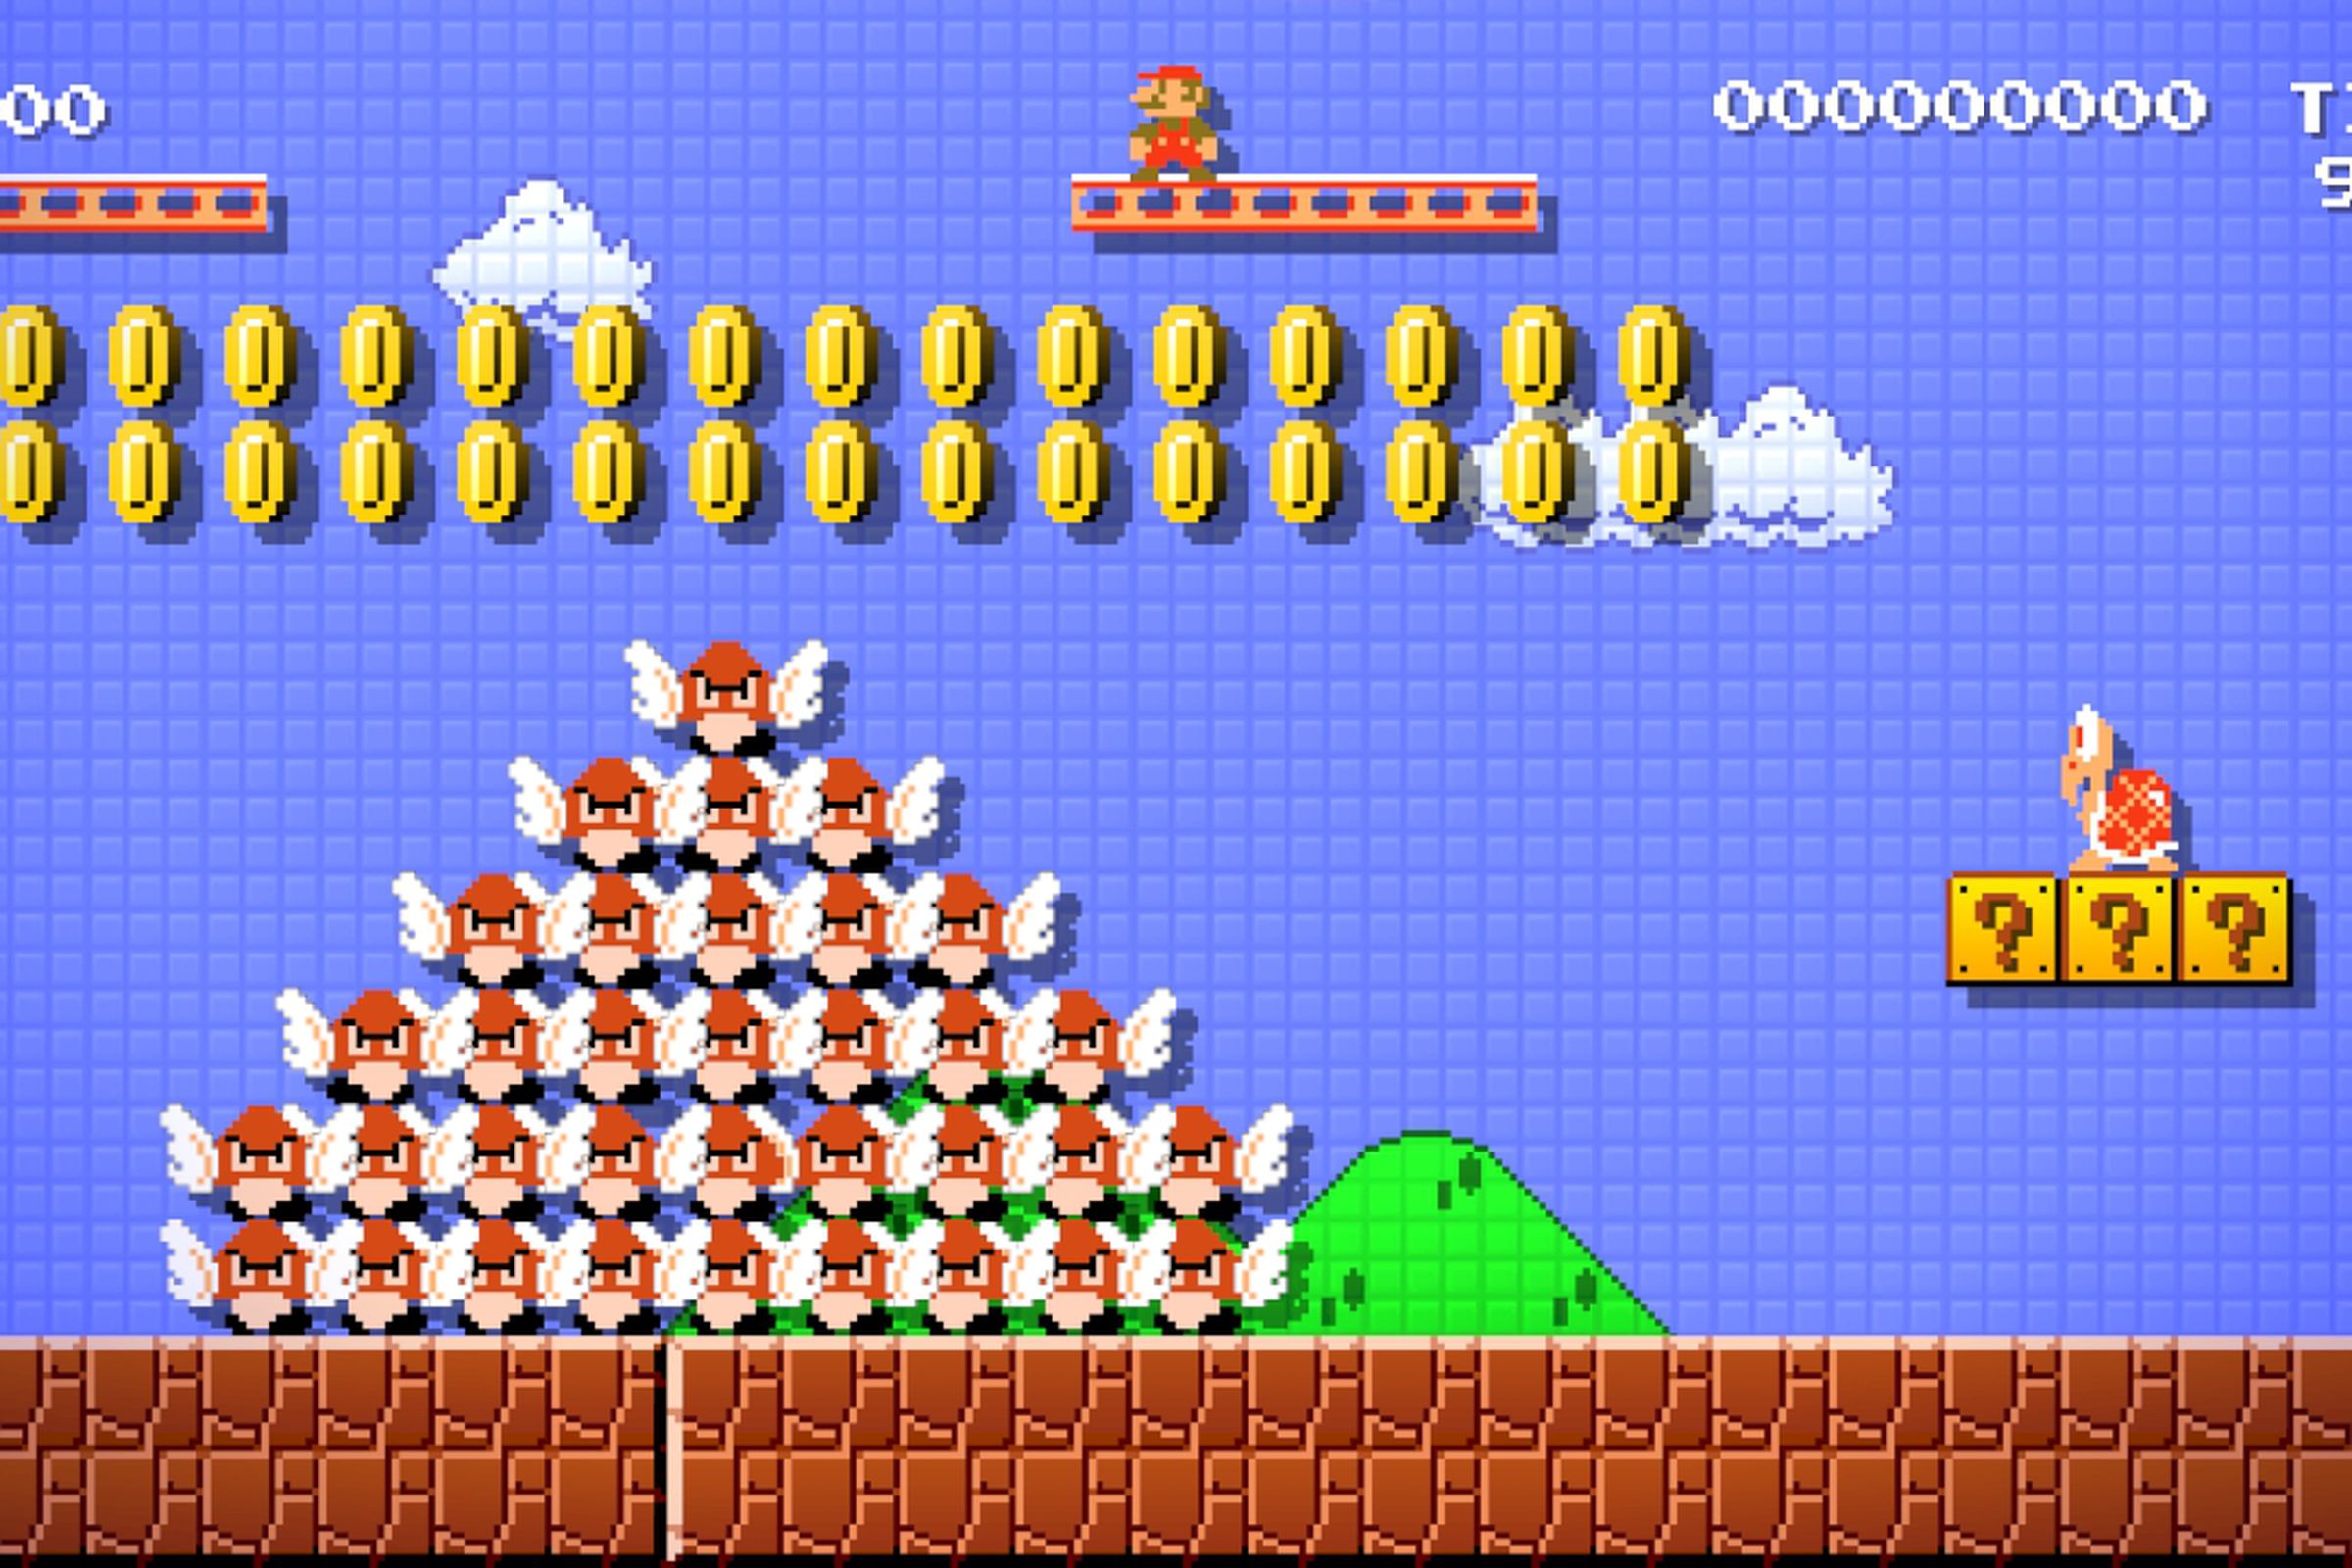 A screenshot from the video game Super Mario Maker for the Nintendo Wii U.